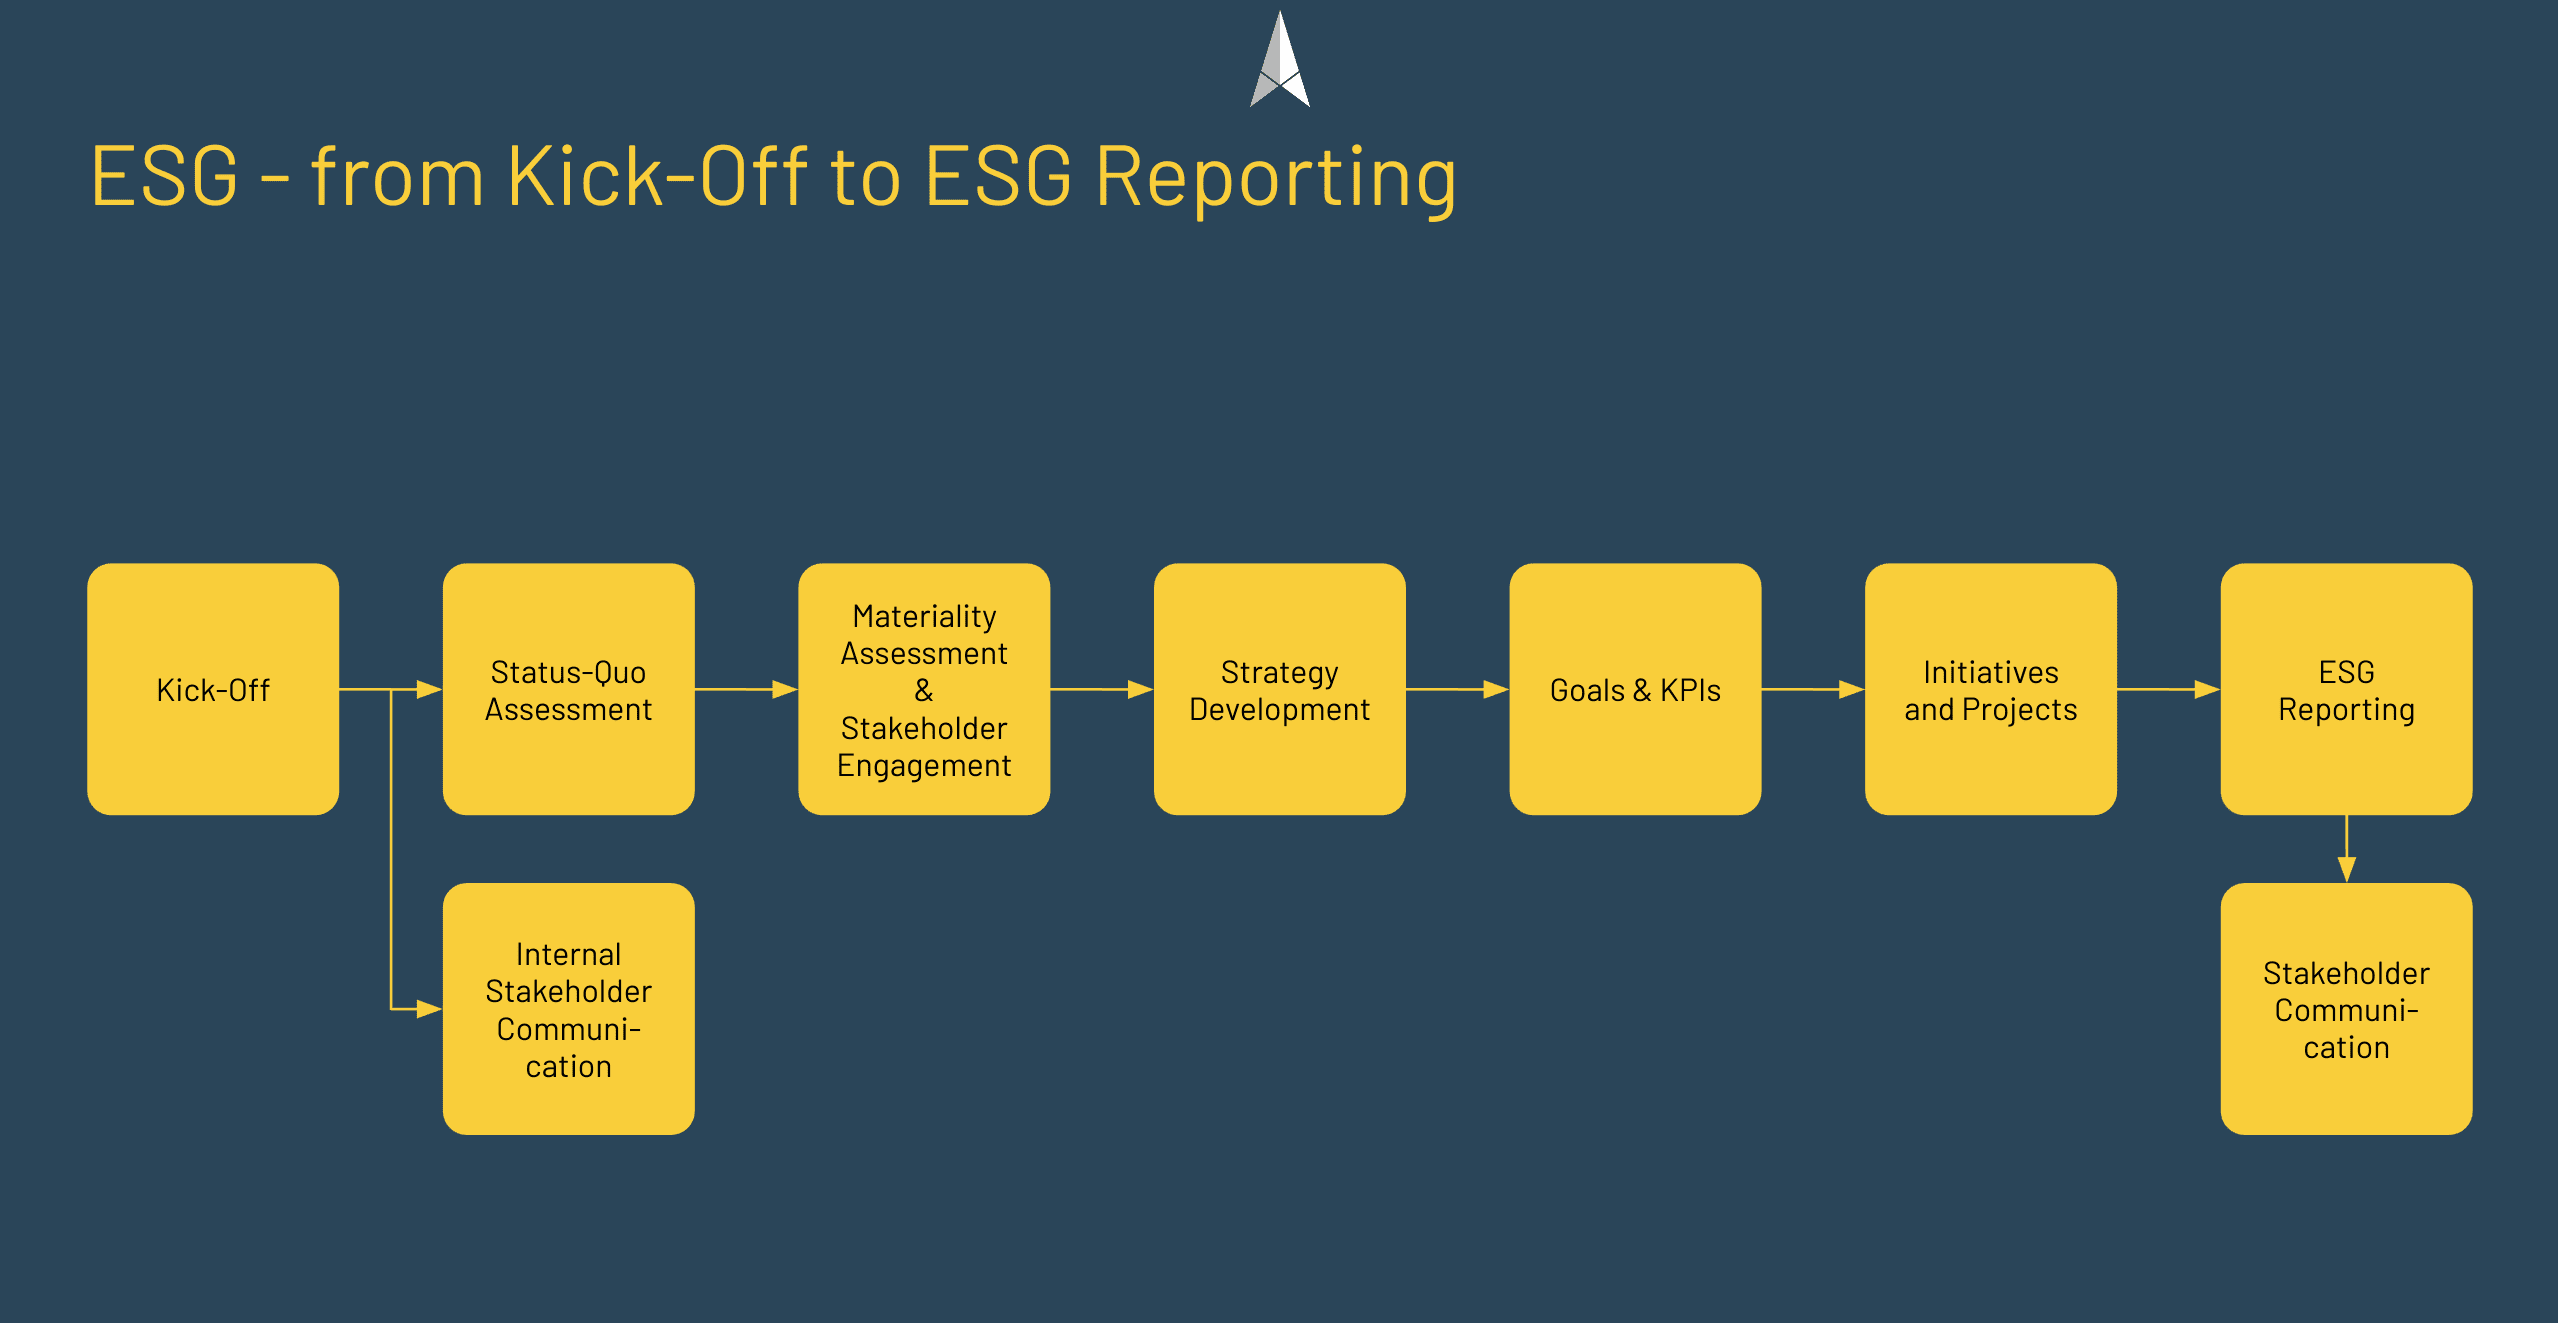 get started with ESG - The process